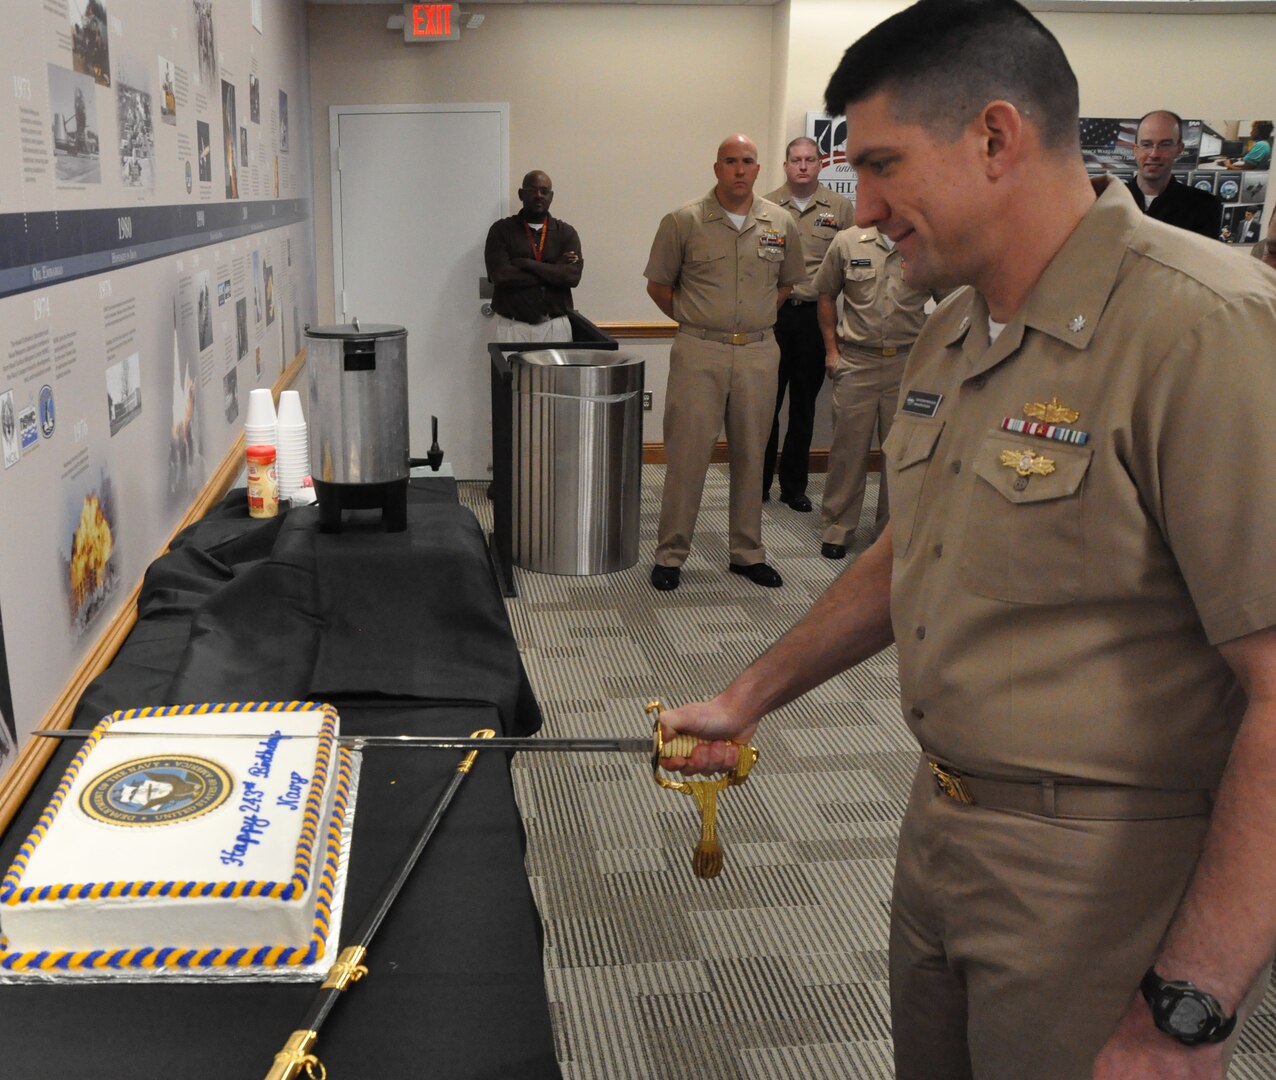 IMAGE: DAHLGREN, Va. (Oct. 12, 2018) - Cmdr. Steven Perchalski cuts the cake in celebration of the Navy's 243rd birthday at Naval Surface Warfare Center Dahlgren Division (NSWCDD). The event featured Perchalski as the command's oldest 
Sailor cutting the Navy's birthday cake with the command's youngest Sailor, Lt. Adam Mattison. The Navy birthday cake-cutting ceremony is important to all Sailors, as it is an annual renewal of each Sailor's commitment to the Navy and 
the Navy's commitment to our nation's quest for peace and freedom worldwide. Perchalski and Mattison cut the cake with a sword, a traditional reminder that NSWCDD Sailors are among a band of warriors, committed to carrying arms 
so that the United States and its people may live in peace.